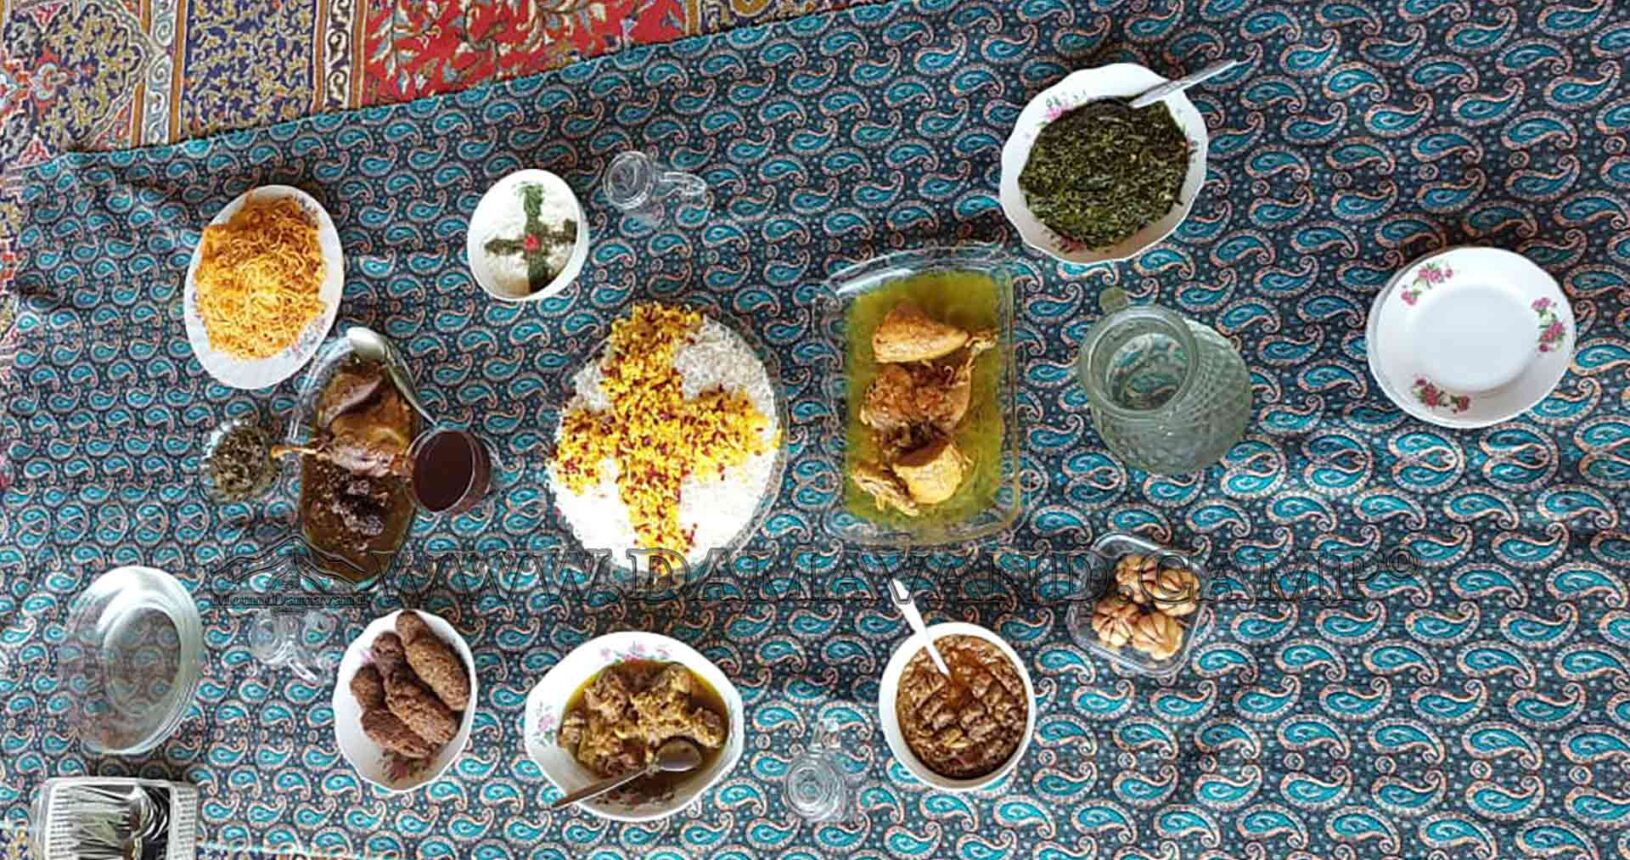 Enjoying a traditional meal with an Iranian family